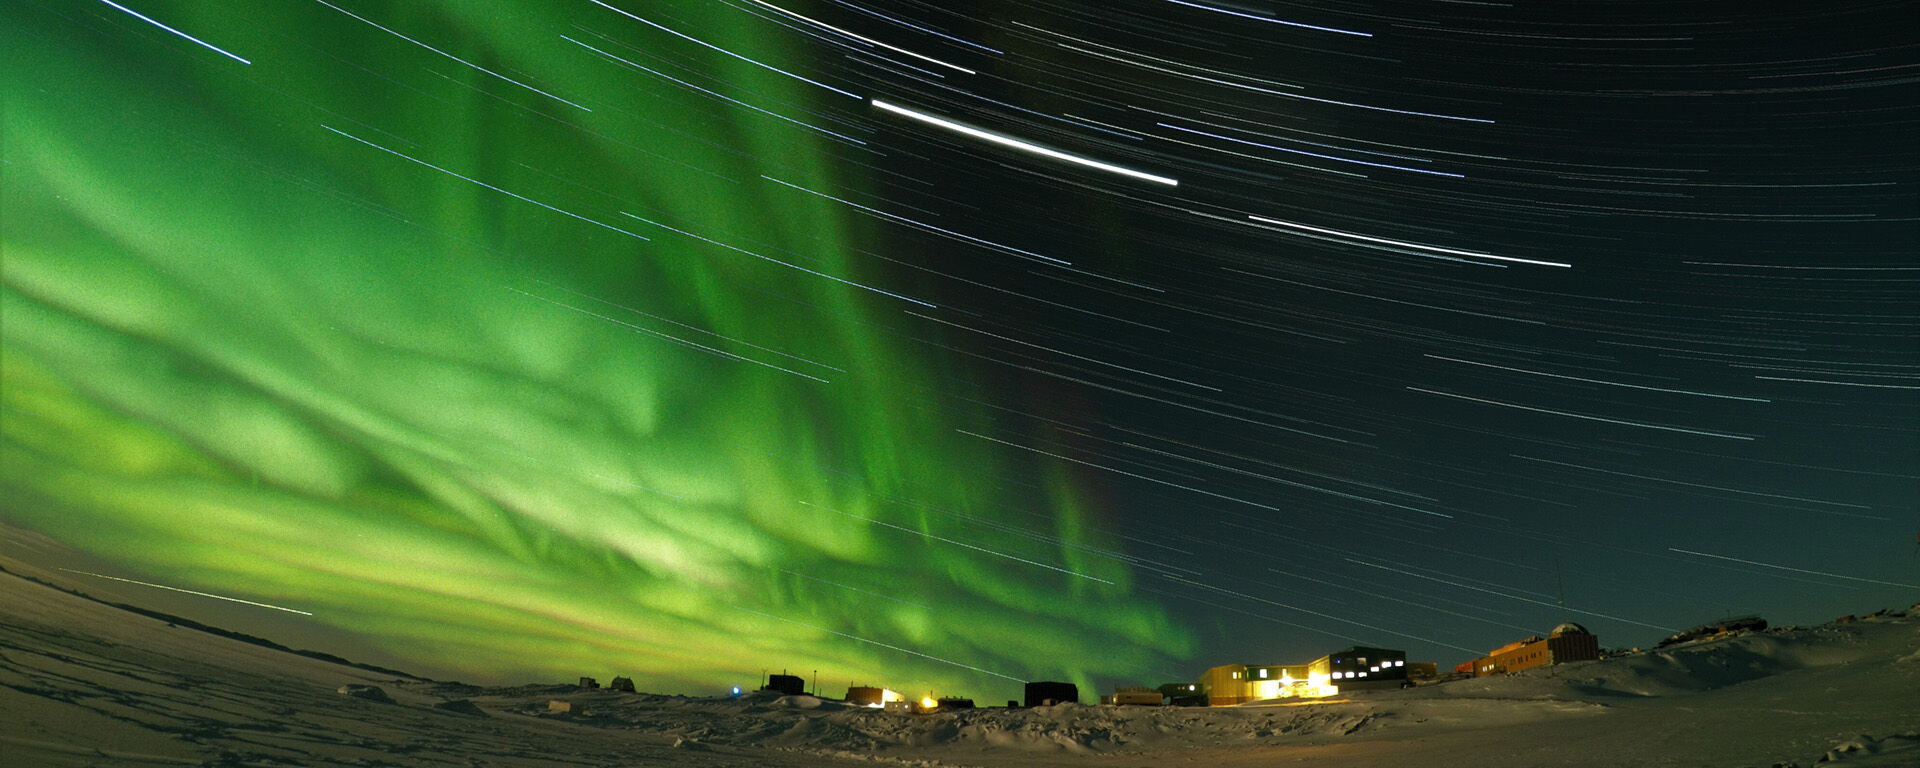 Long exposure at night with star trails and green Aurora lights, in the distance buildings have lights on.